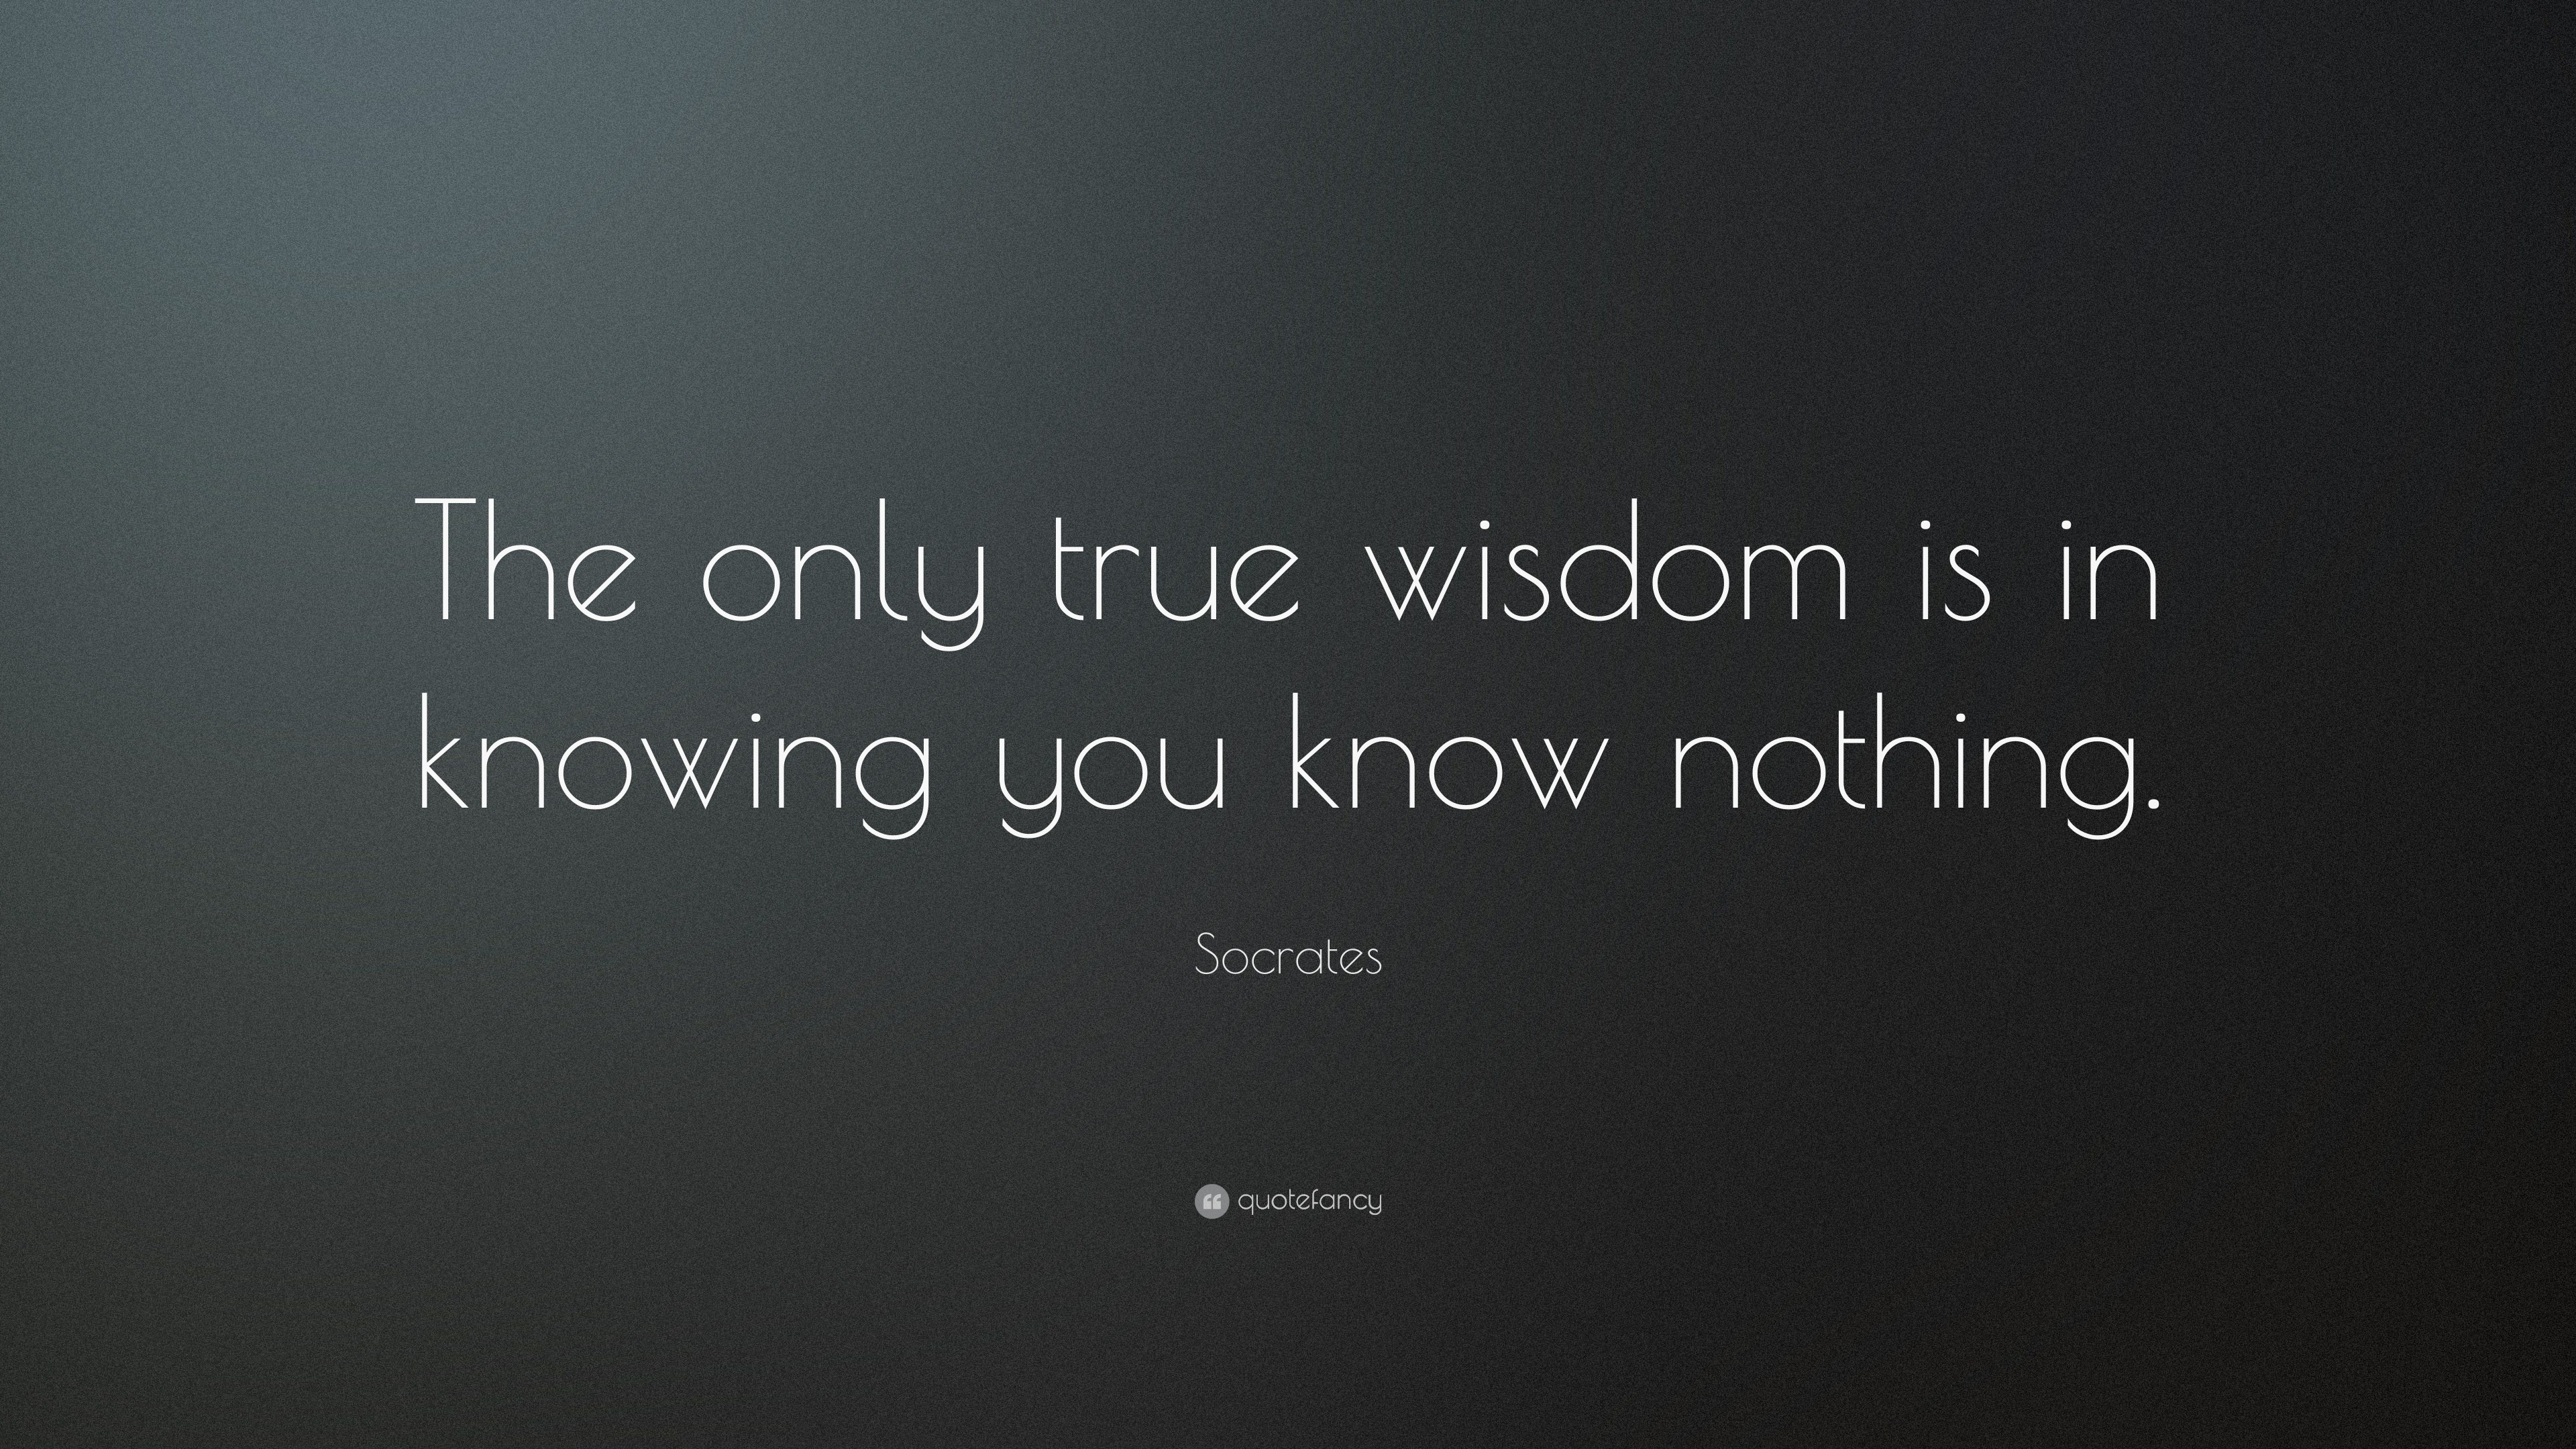 3840x2160 Wisdom Quotes: “The only true wisdom is in knowing you know nothing.”